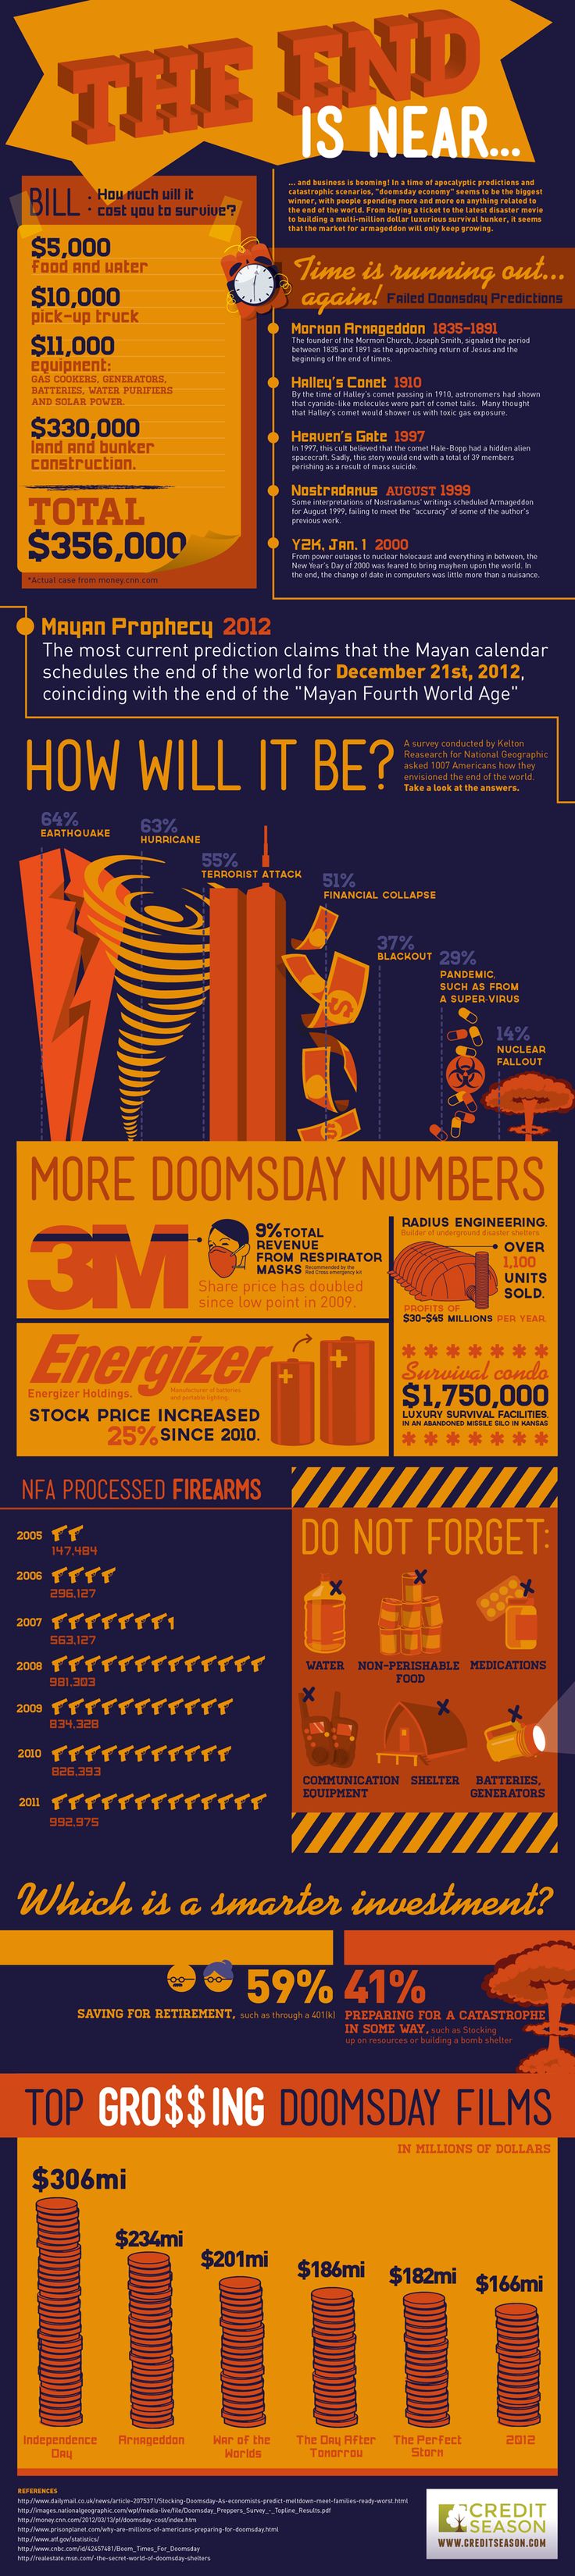 Doomsday Economy: The End Is Near!